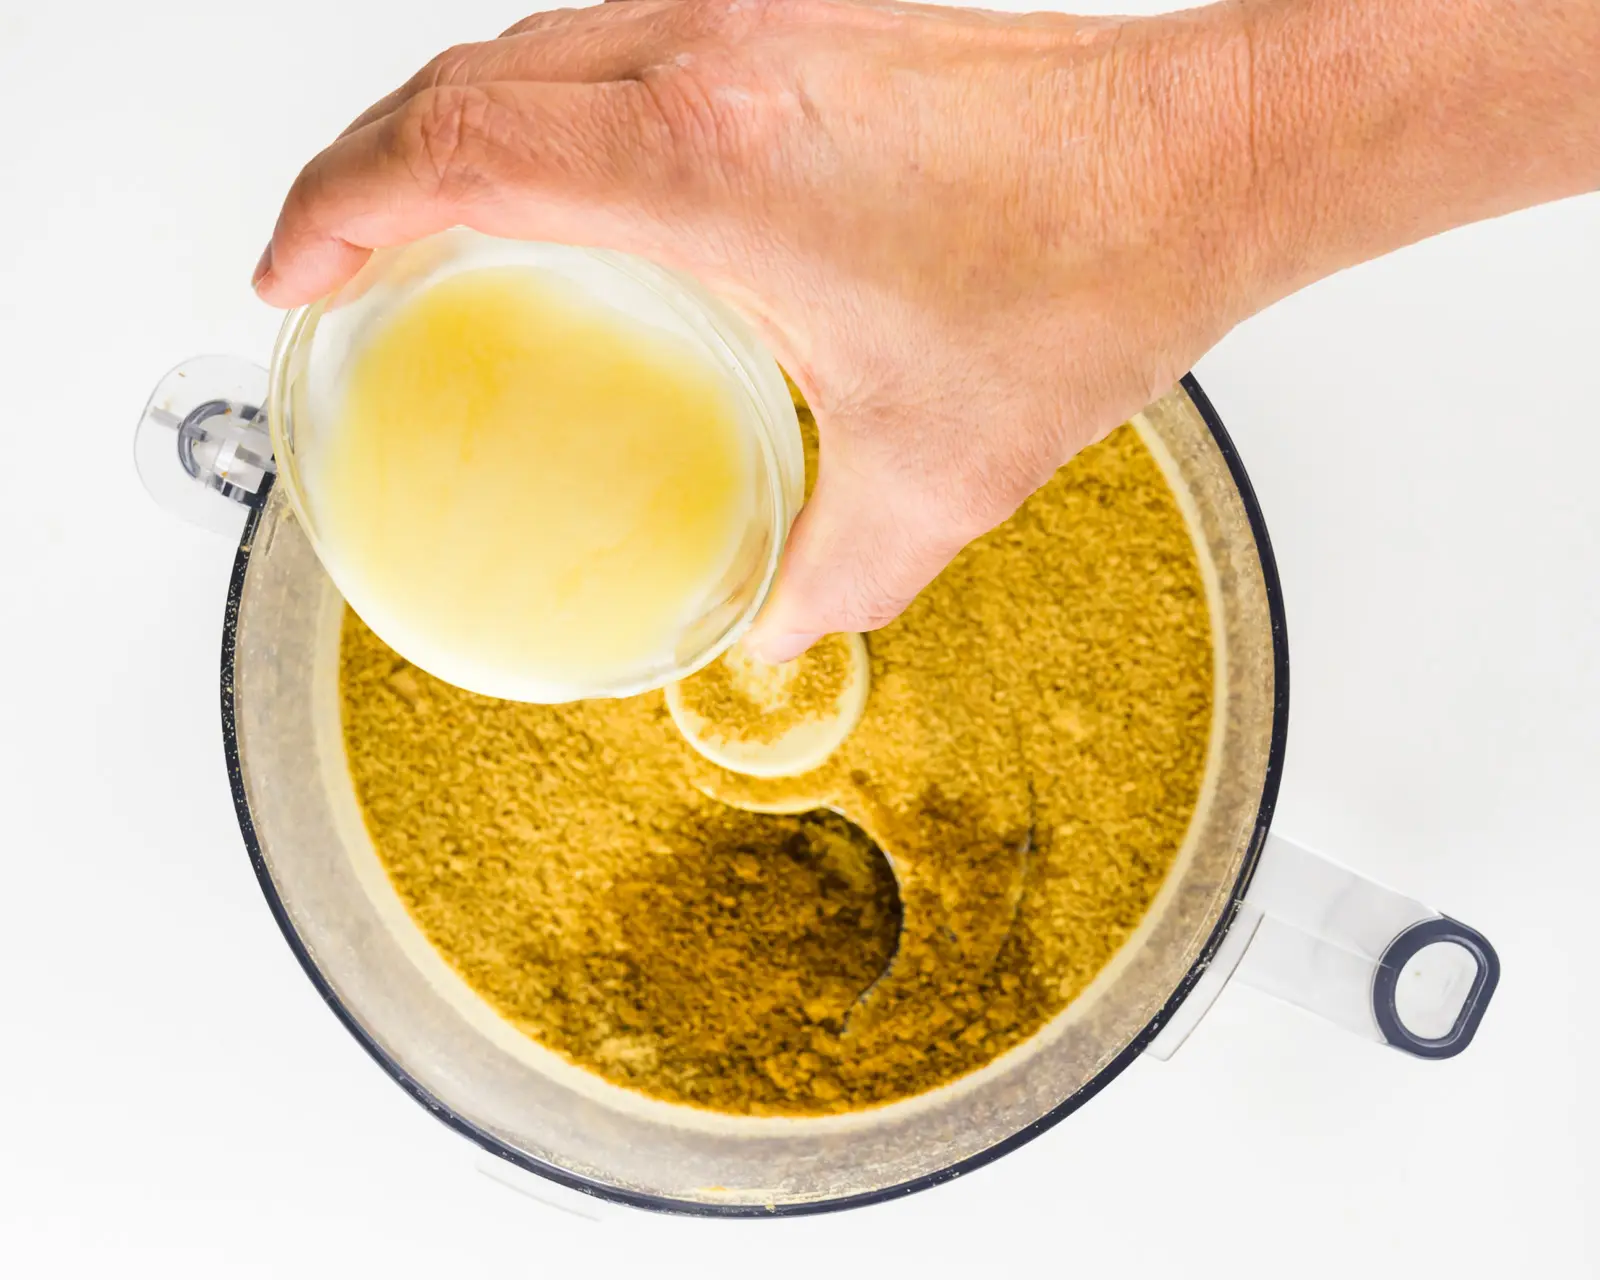 A hand holds a bowl of melted butter and is pouring it into a food processor full of crumbs.